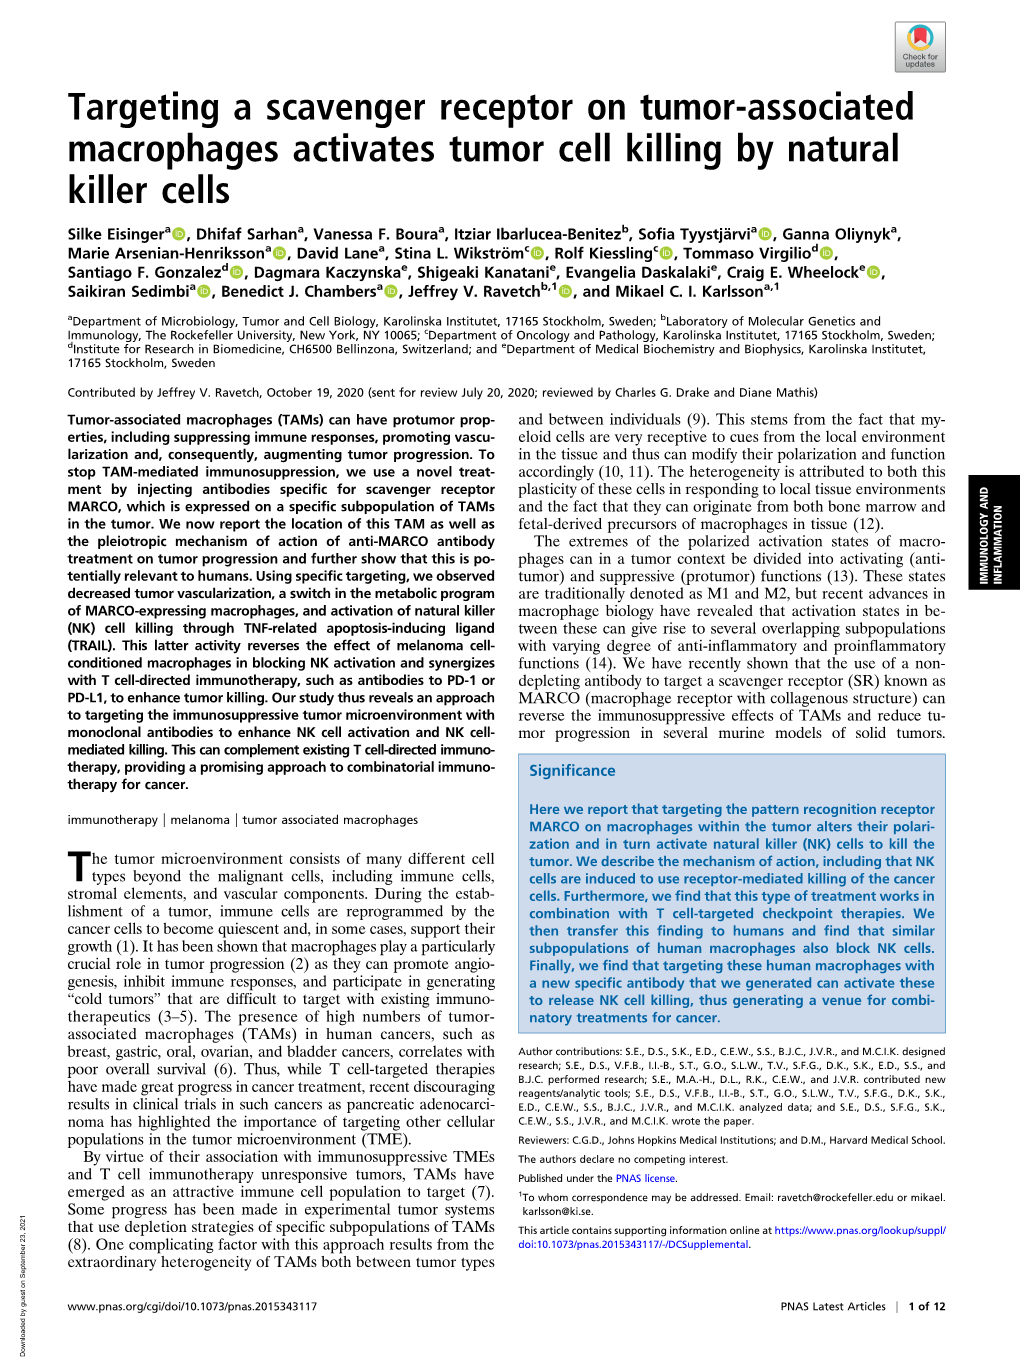 Targeting a Scavenger Receptor on Tumor-Associated Macrophages Activates Tumor Cell Killing by Natural Killer Cells